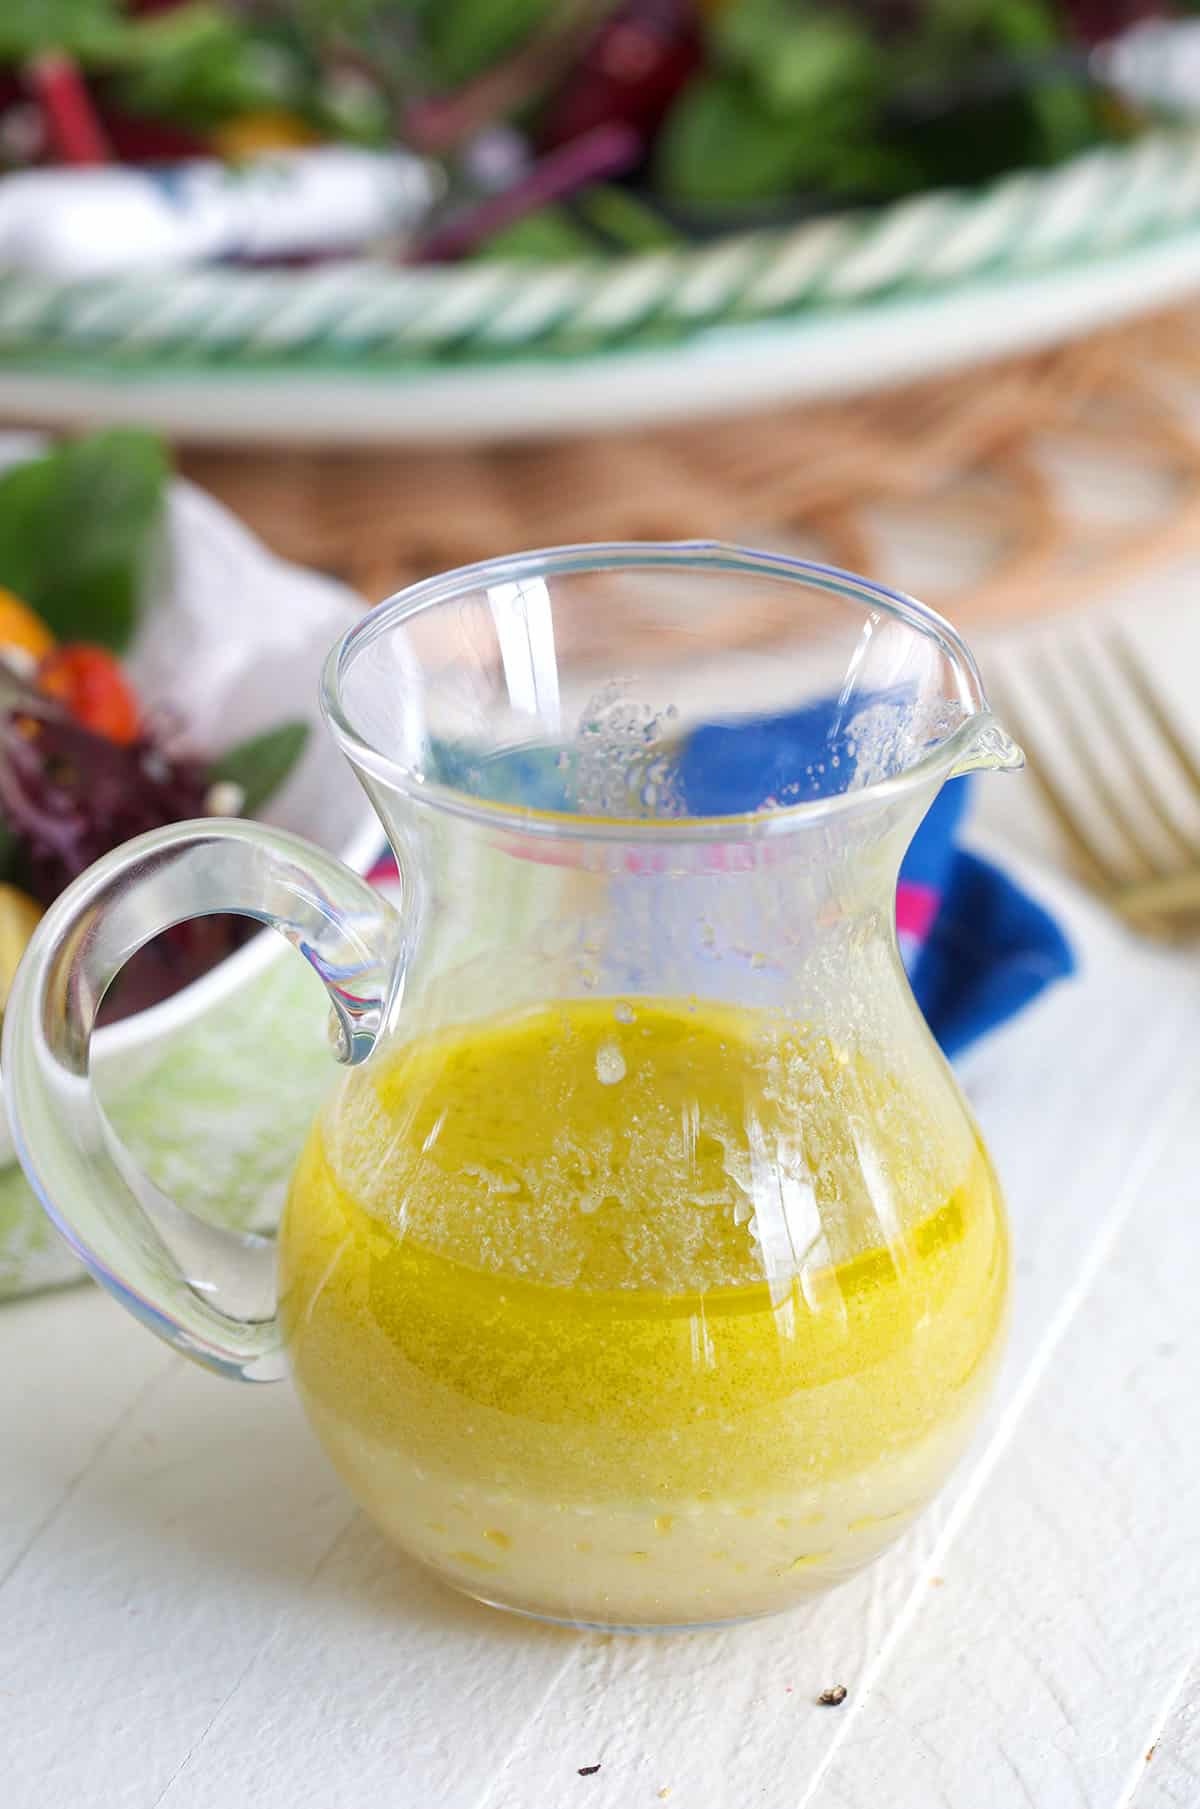 A small glass pitcher is filled with salad dressing. 